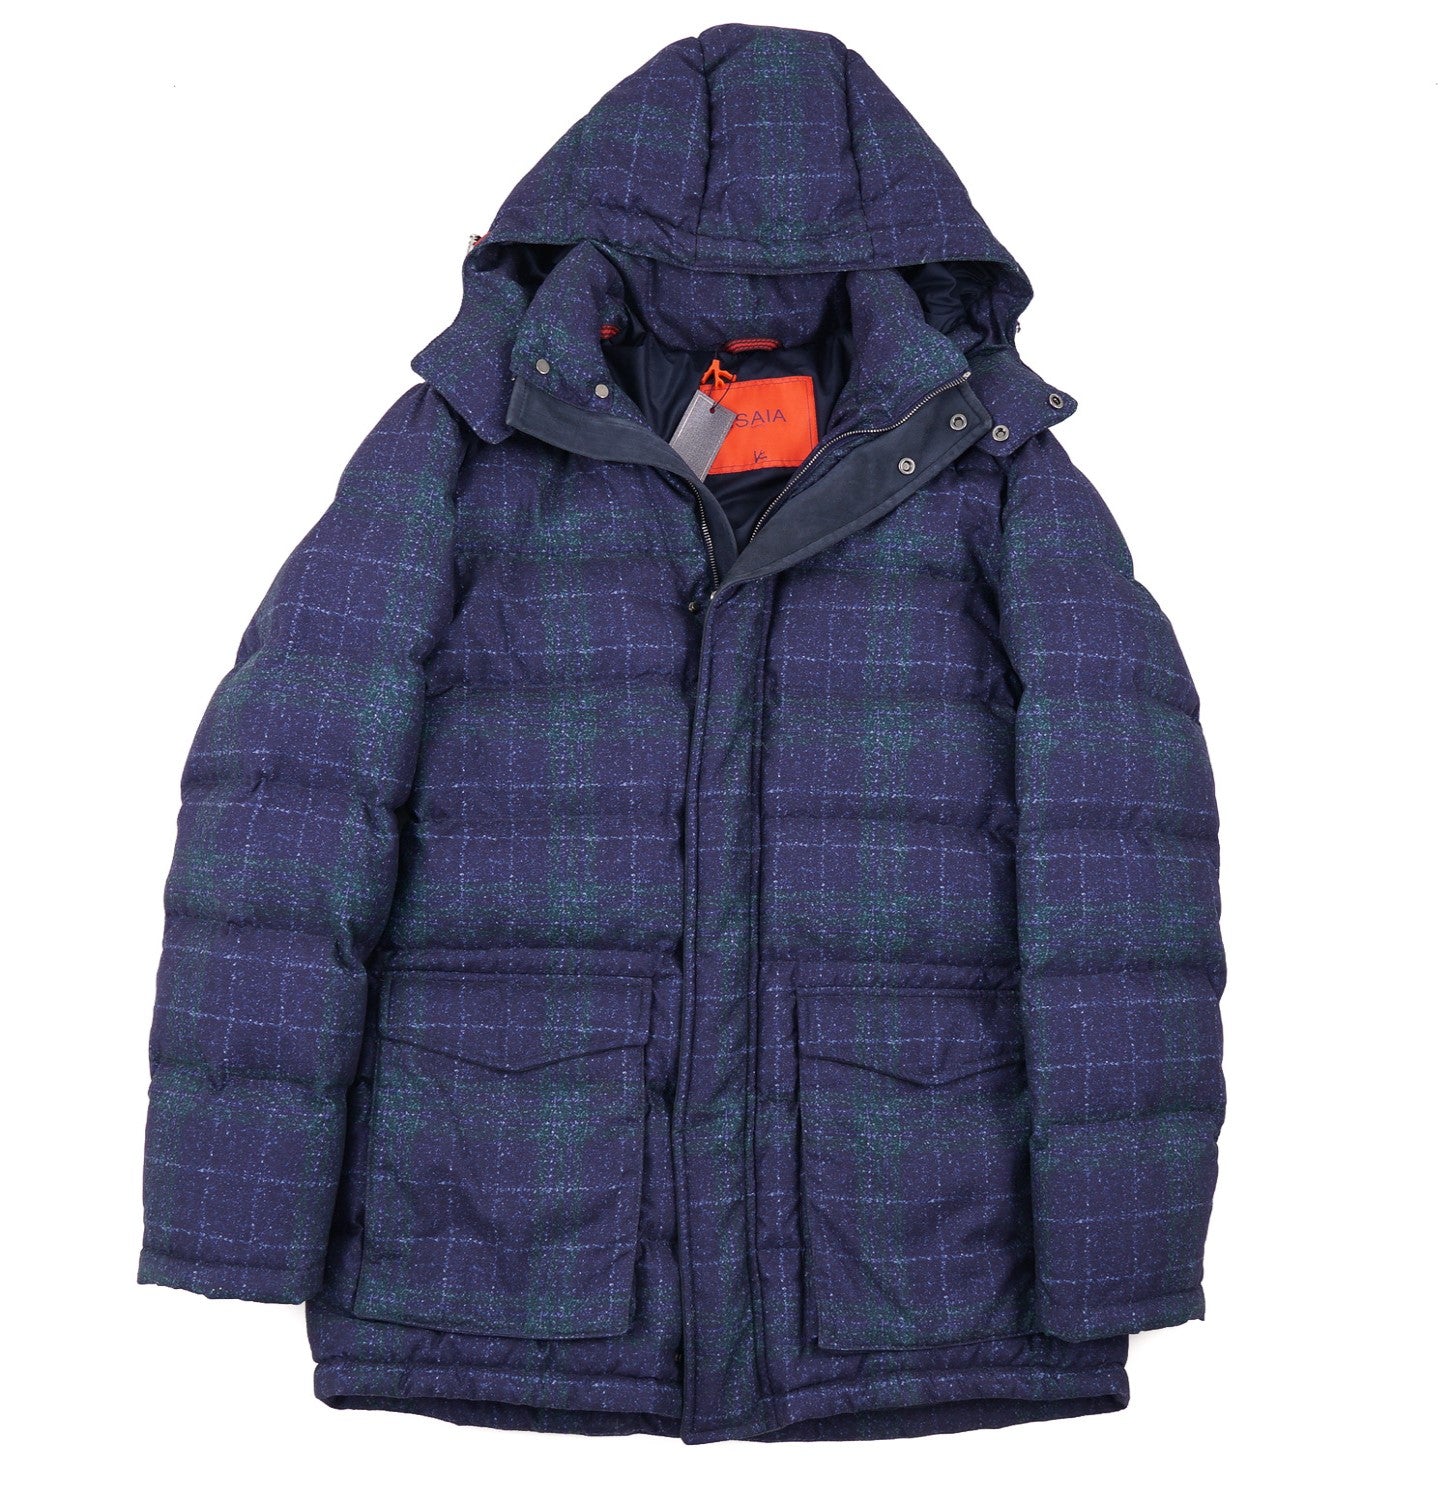 Isaia Insulated Quilted Parka - Top Shelf Apparel